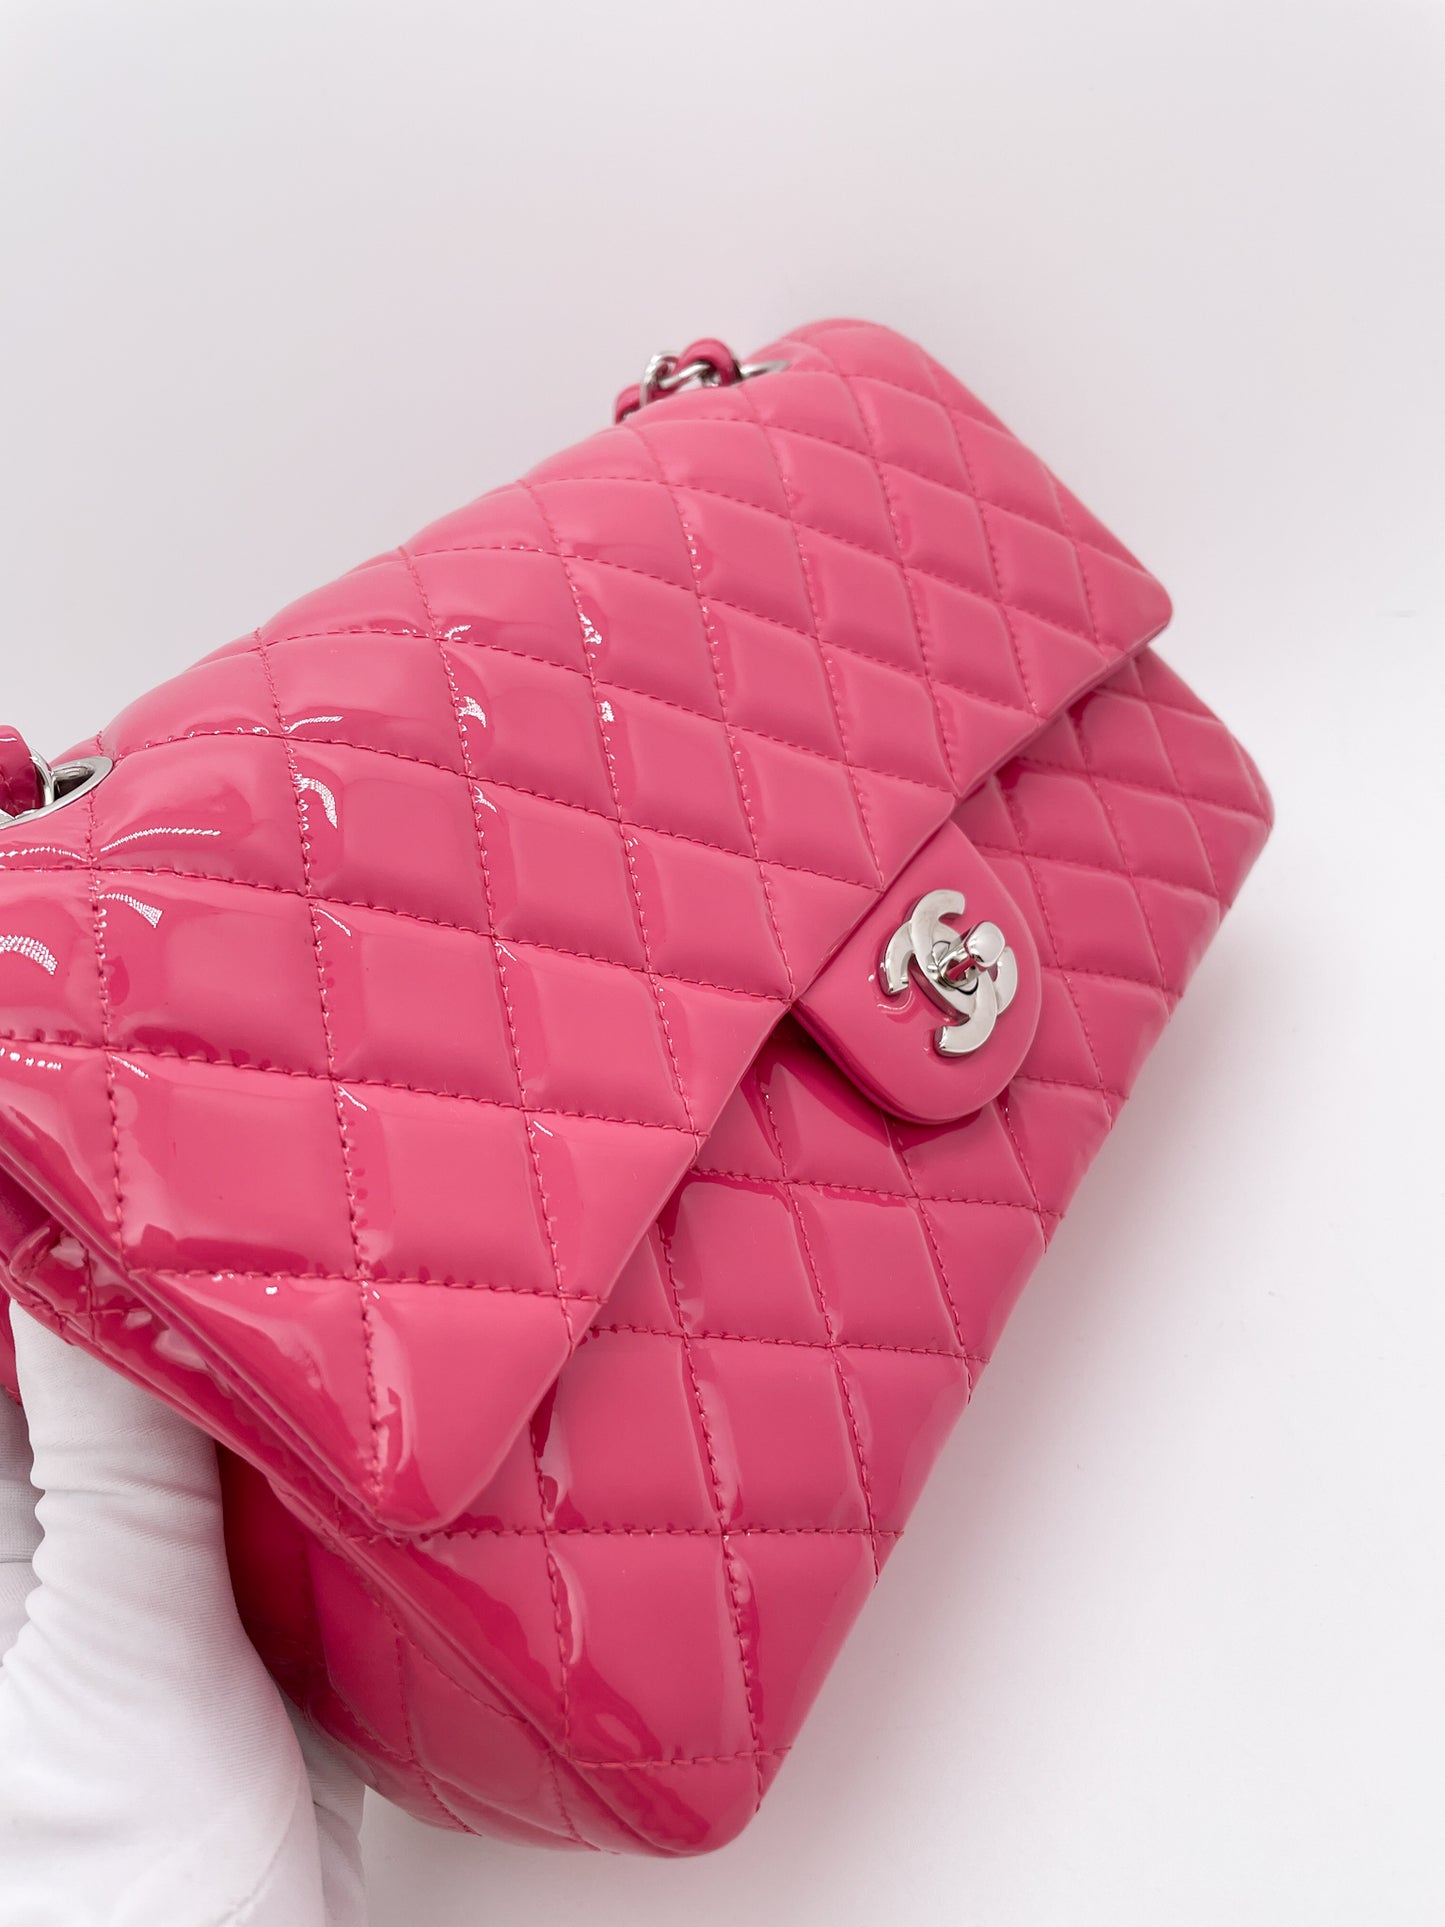 CHANEL CLASSIC FLAP PINK PATENT LEATHER